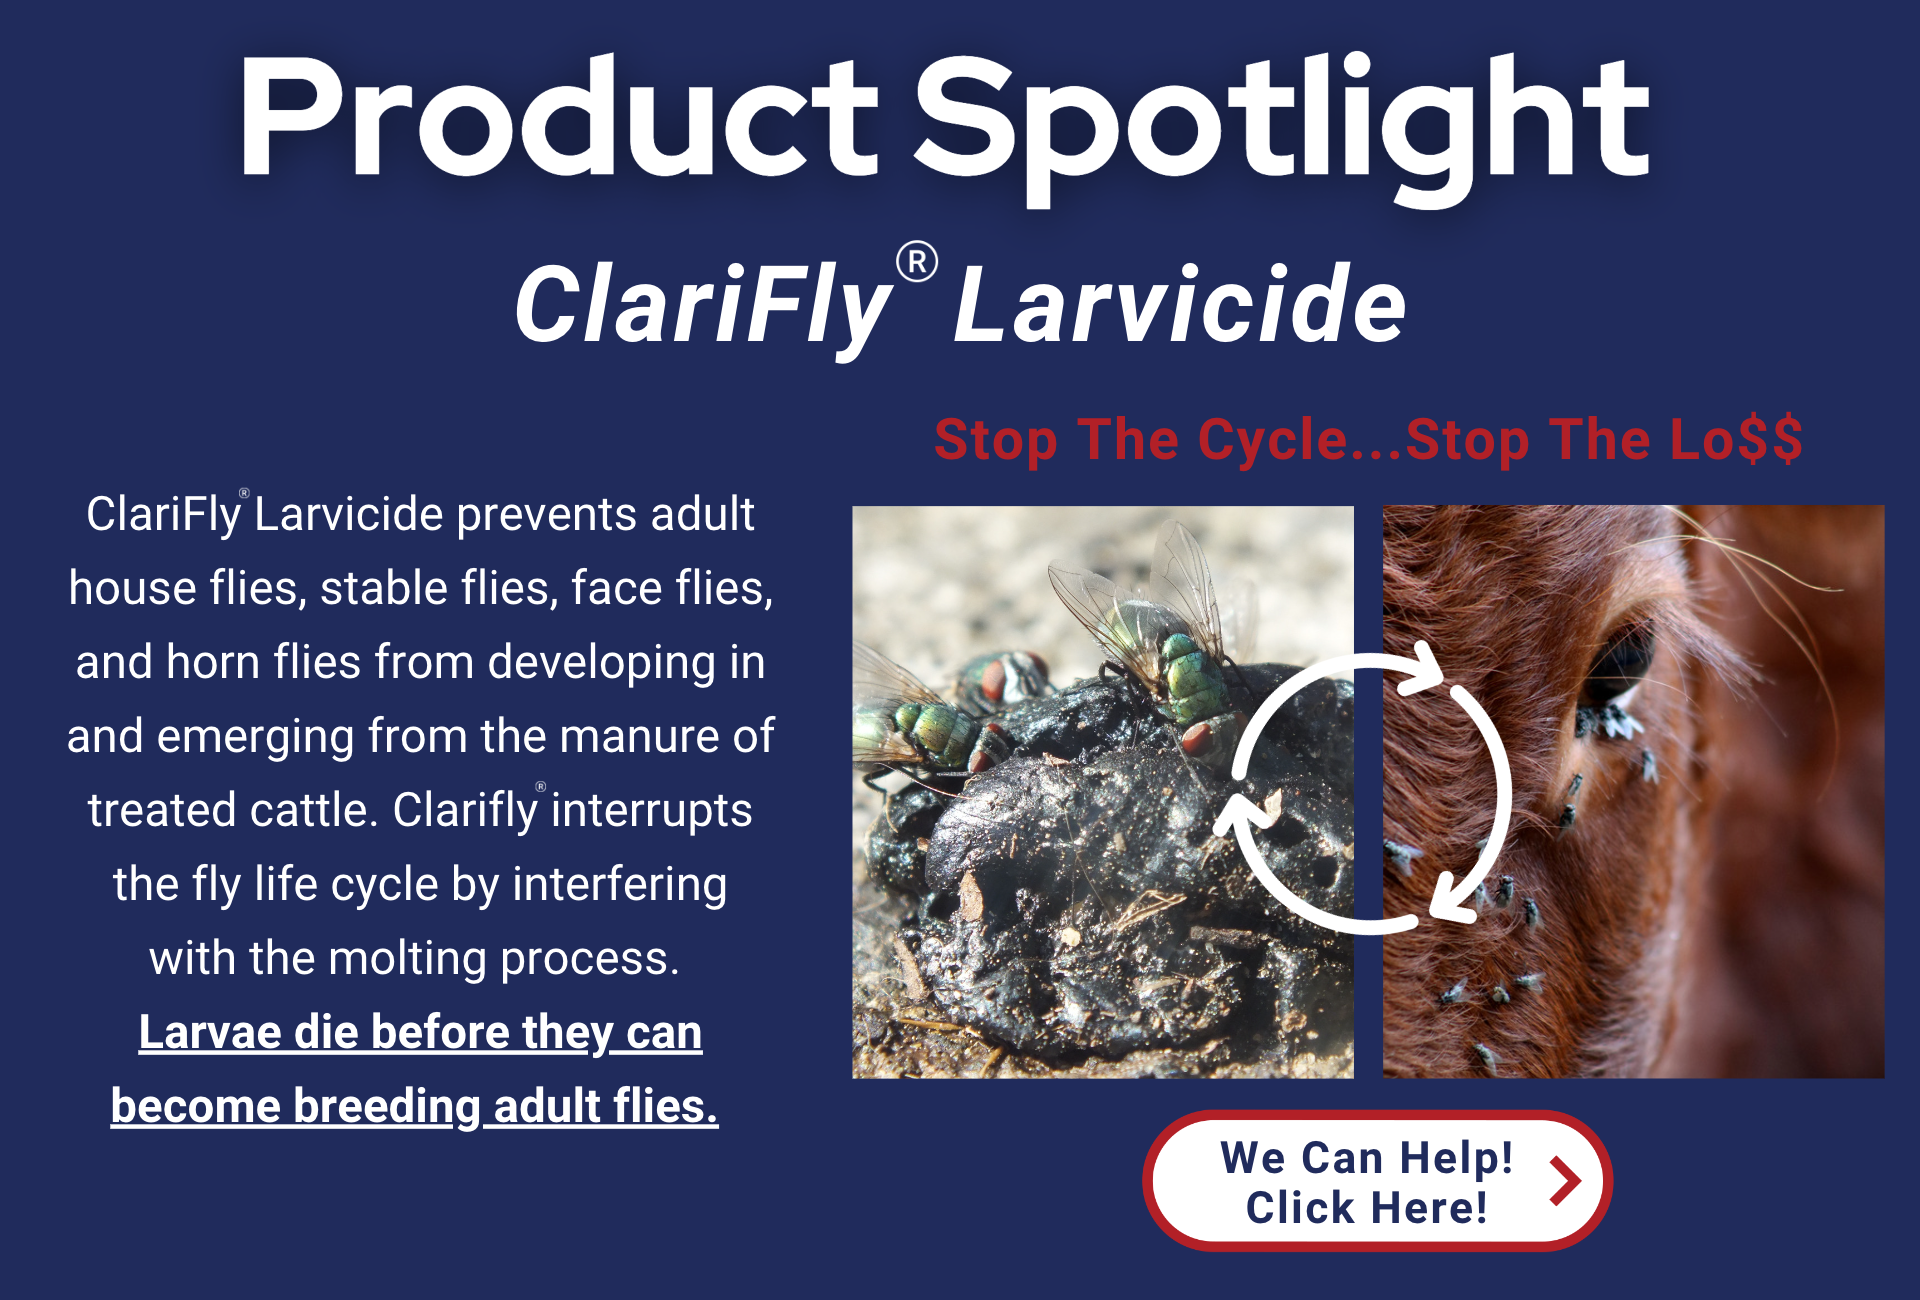 Product spotlight card for Clarify Larvicide